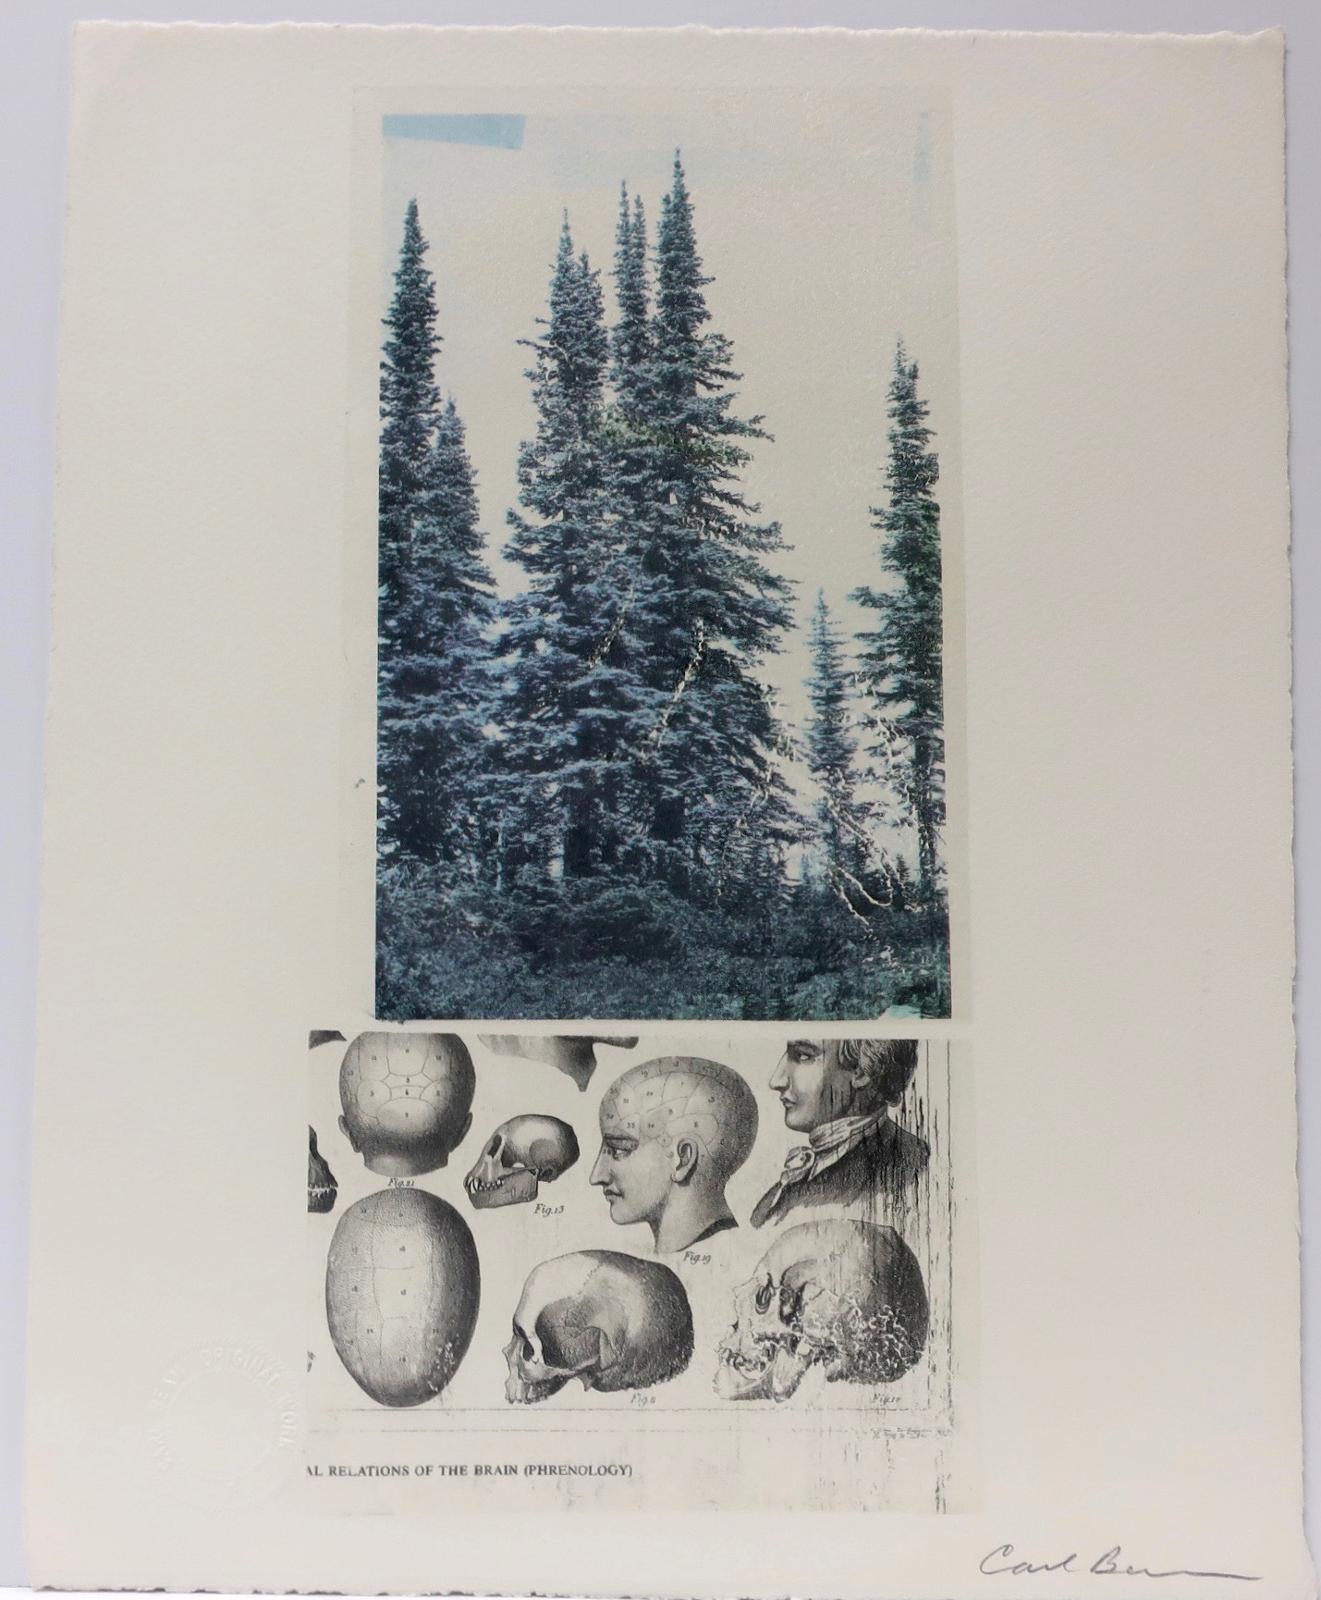 Carl Beam (1943-2005) - Tall Pines - Relations Of The Brain